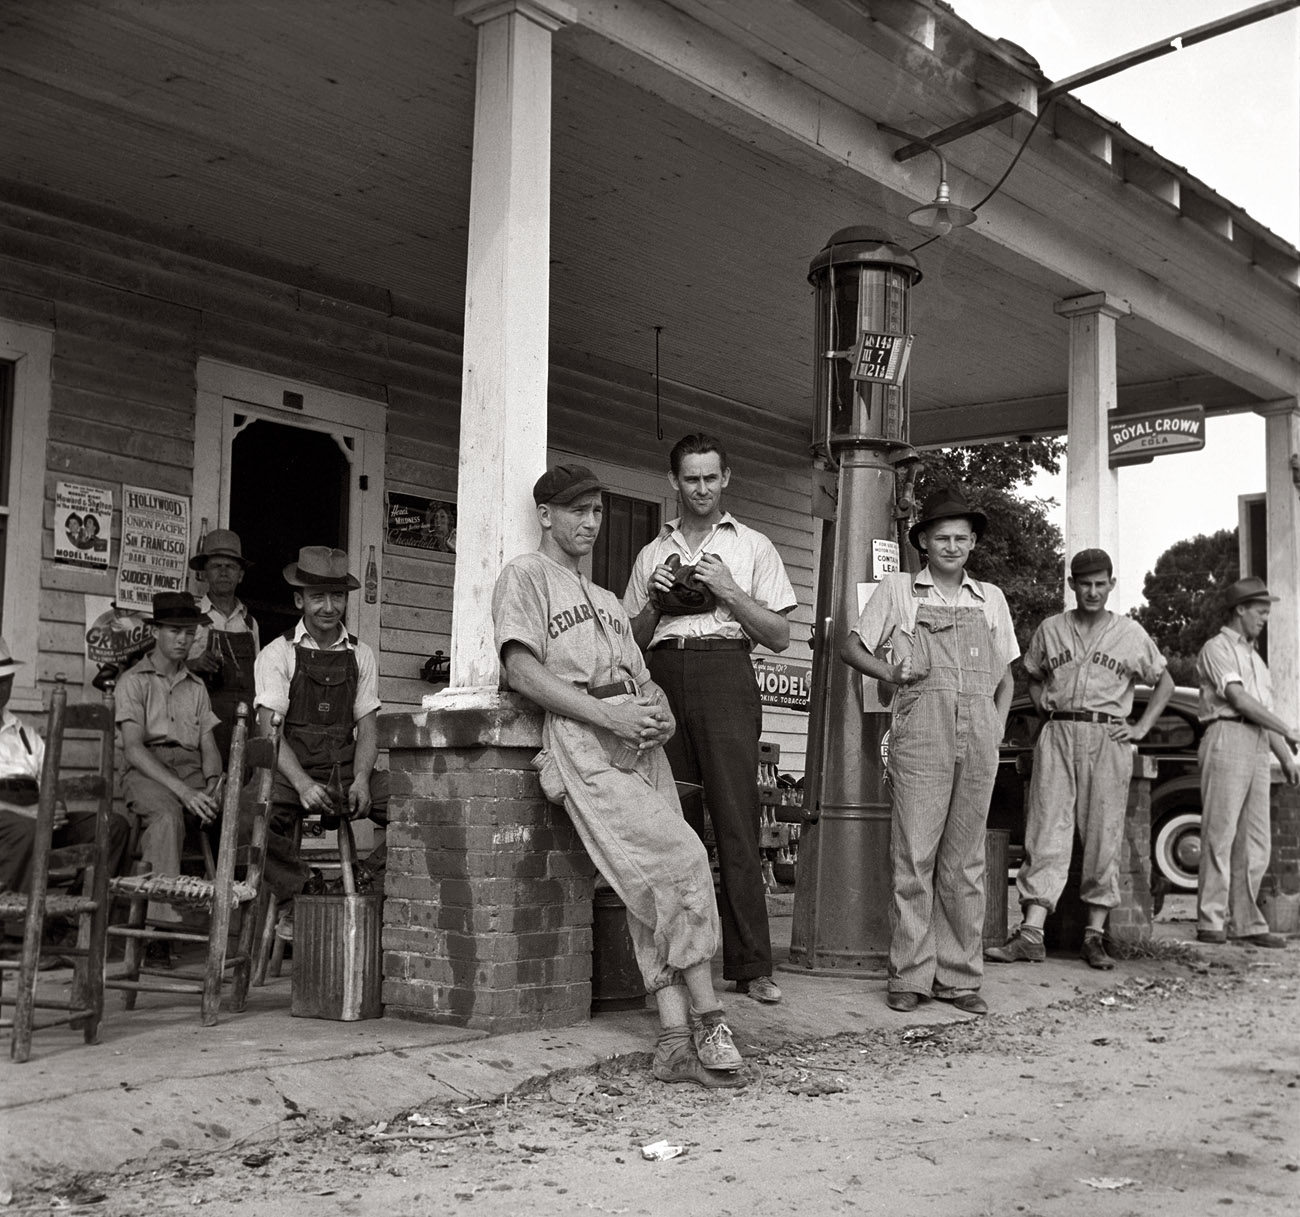 Fourth of July 1939 near Chapel Hill, North Carolina. "Rural filling stations become community centers and general loafing grounds. Cedargrove Team members about to play in a baseball game." Medium-format nitrate negative by Dorothea Lange. View full size.